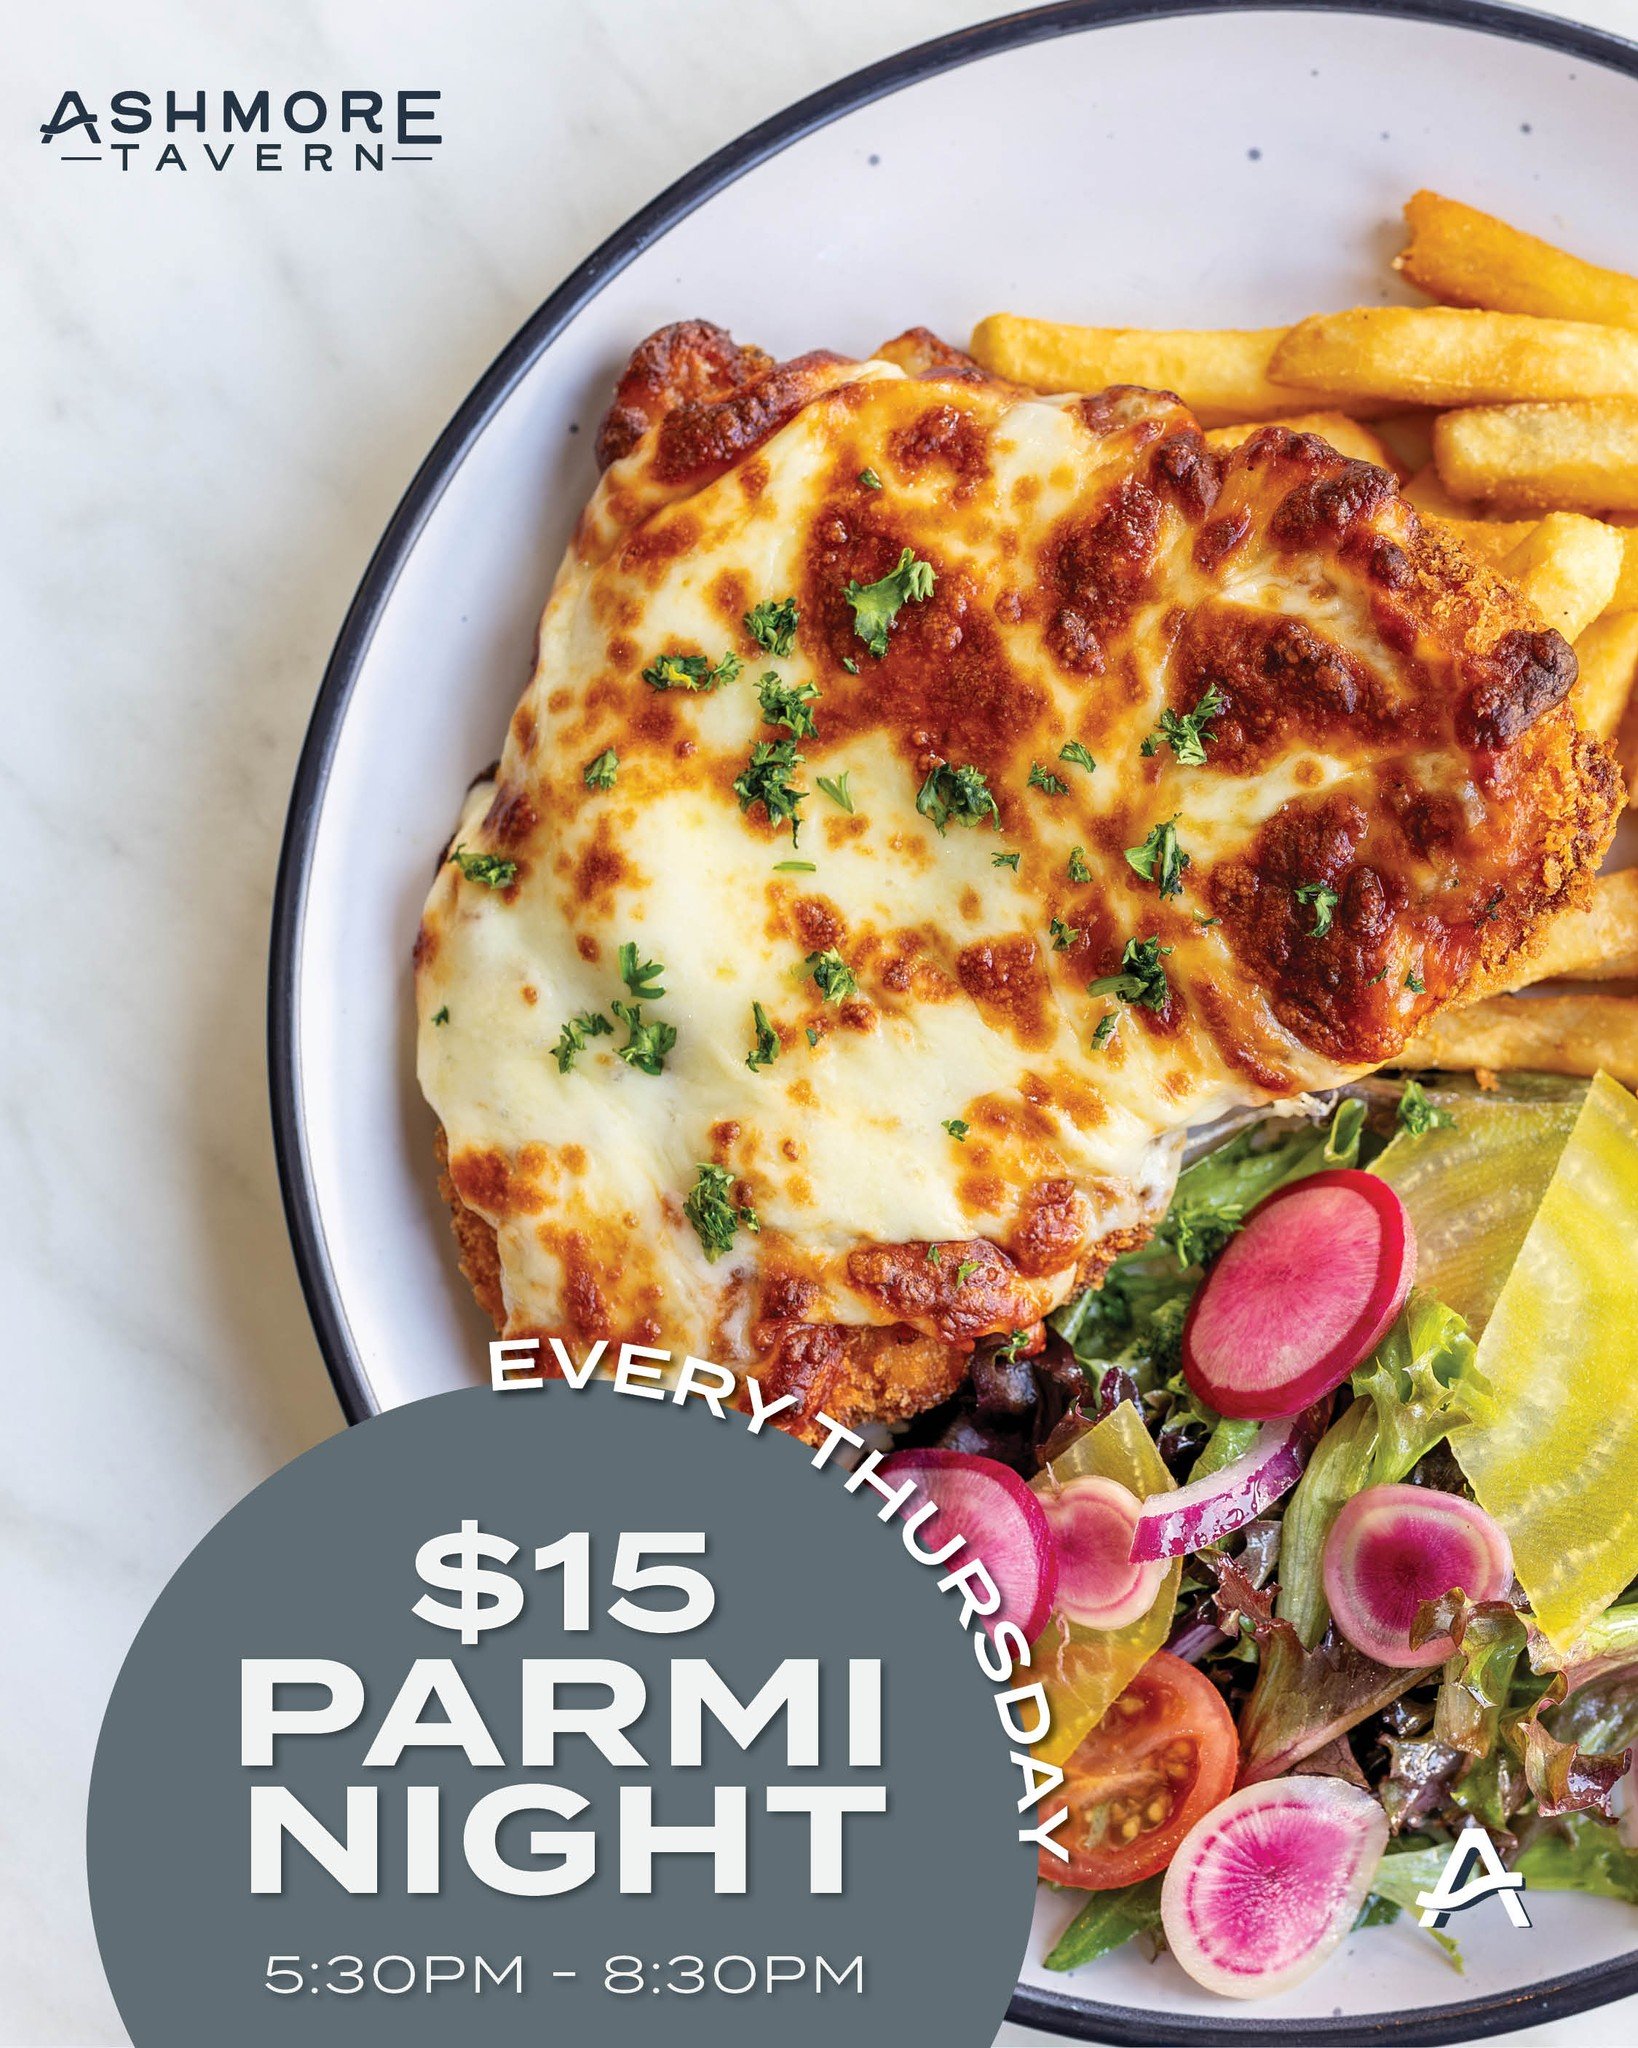 It's $15 Parmi Night at Ashmore Tavern! 🤩

Indulge in our classic chicken parmigiana served with beer battered chips and house salad from 5:30pm to 8:30pm.

Book a table with the link in our bio 📲 

#ParmiNight #AshmoreTavern #Ashmore #GoldCoast #C